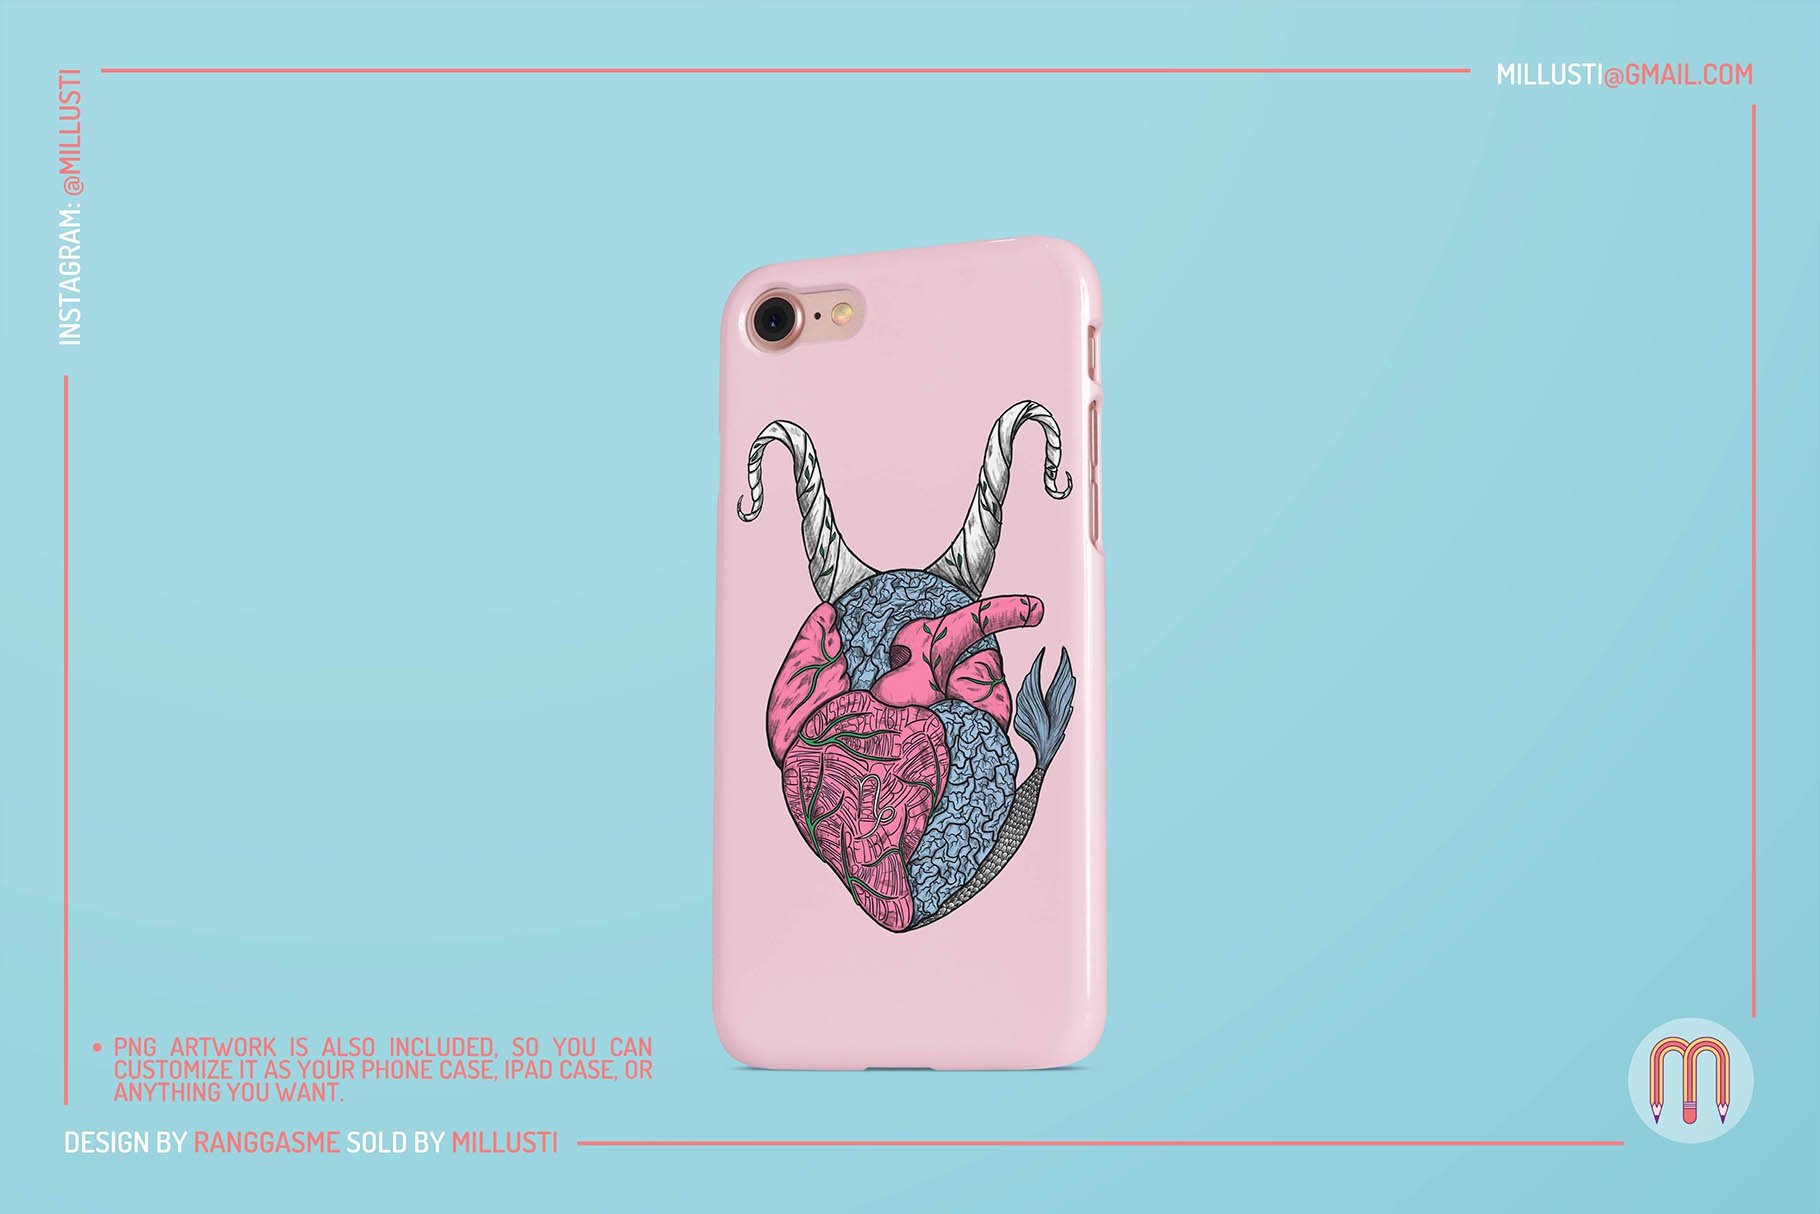 Pink phone case with the heart design.